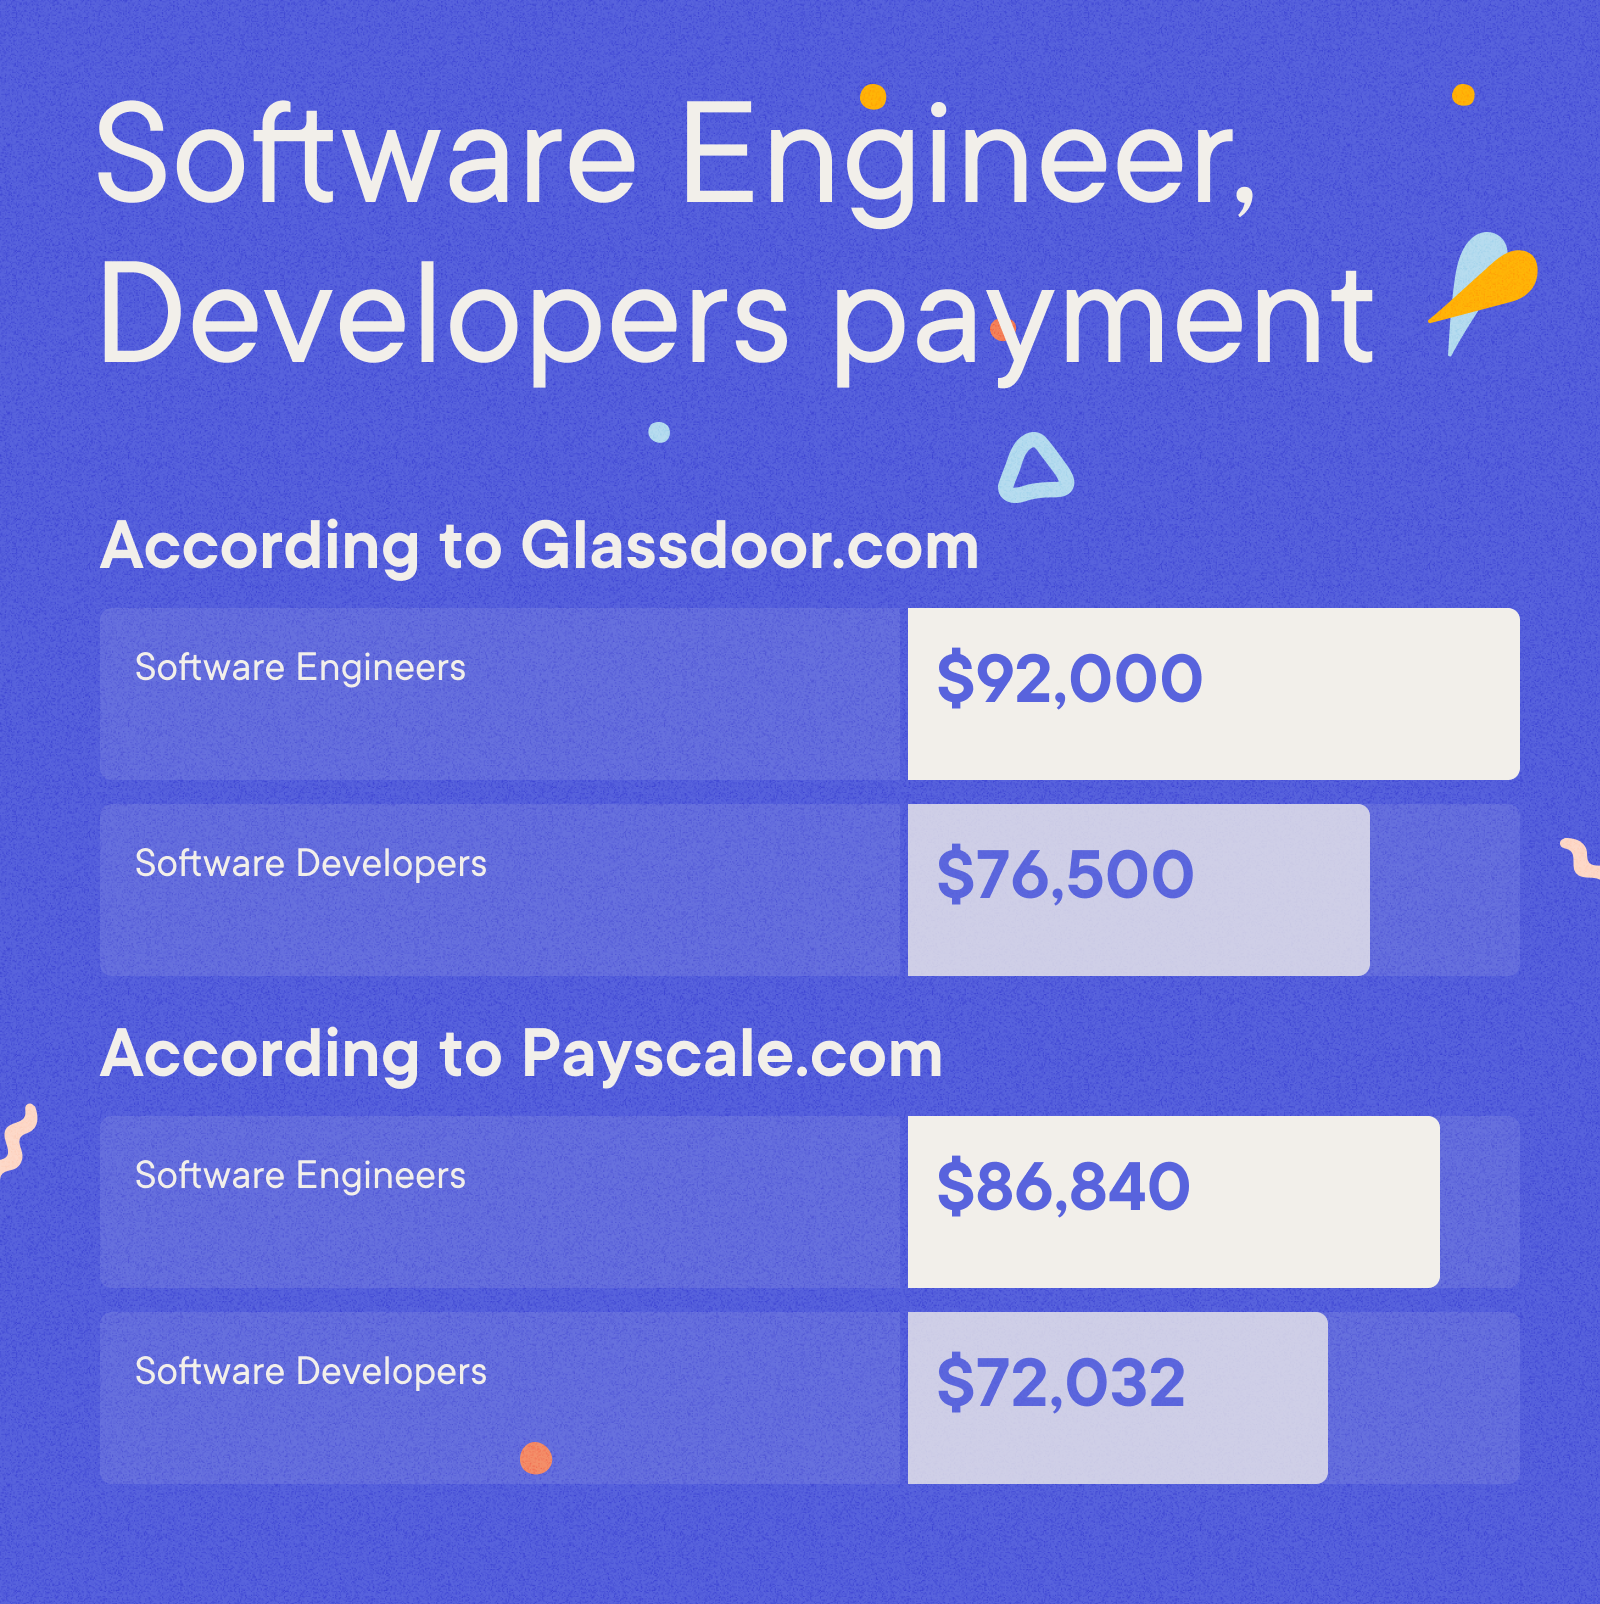 Software Engineer Cover Letter Example - Software Engineer, Developers payment